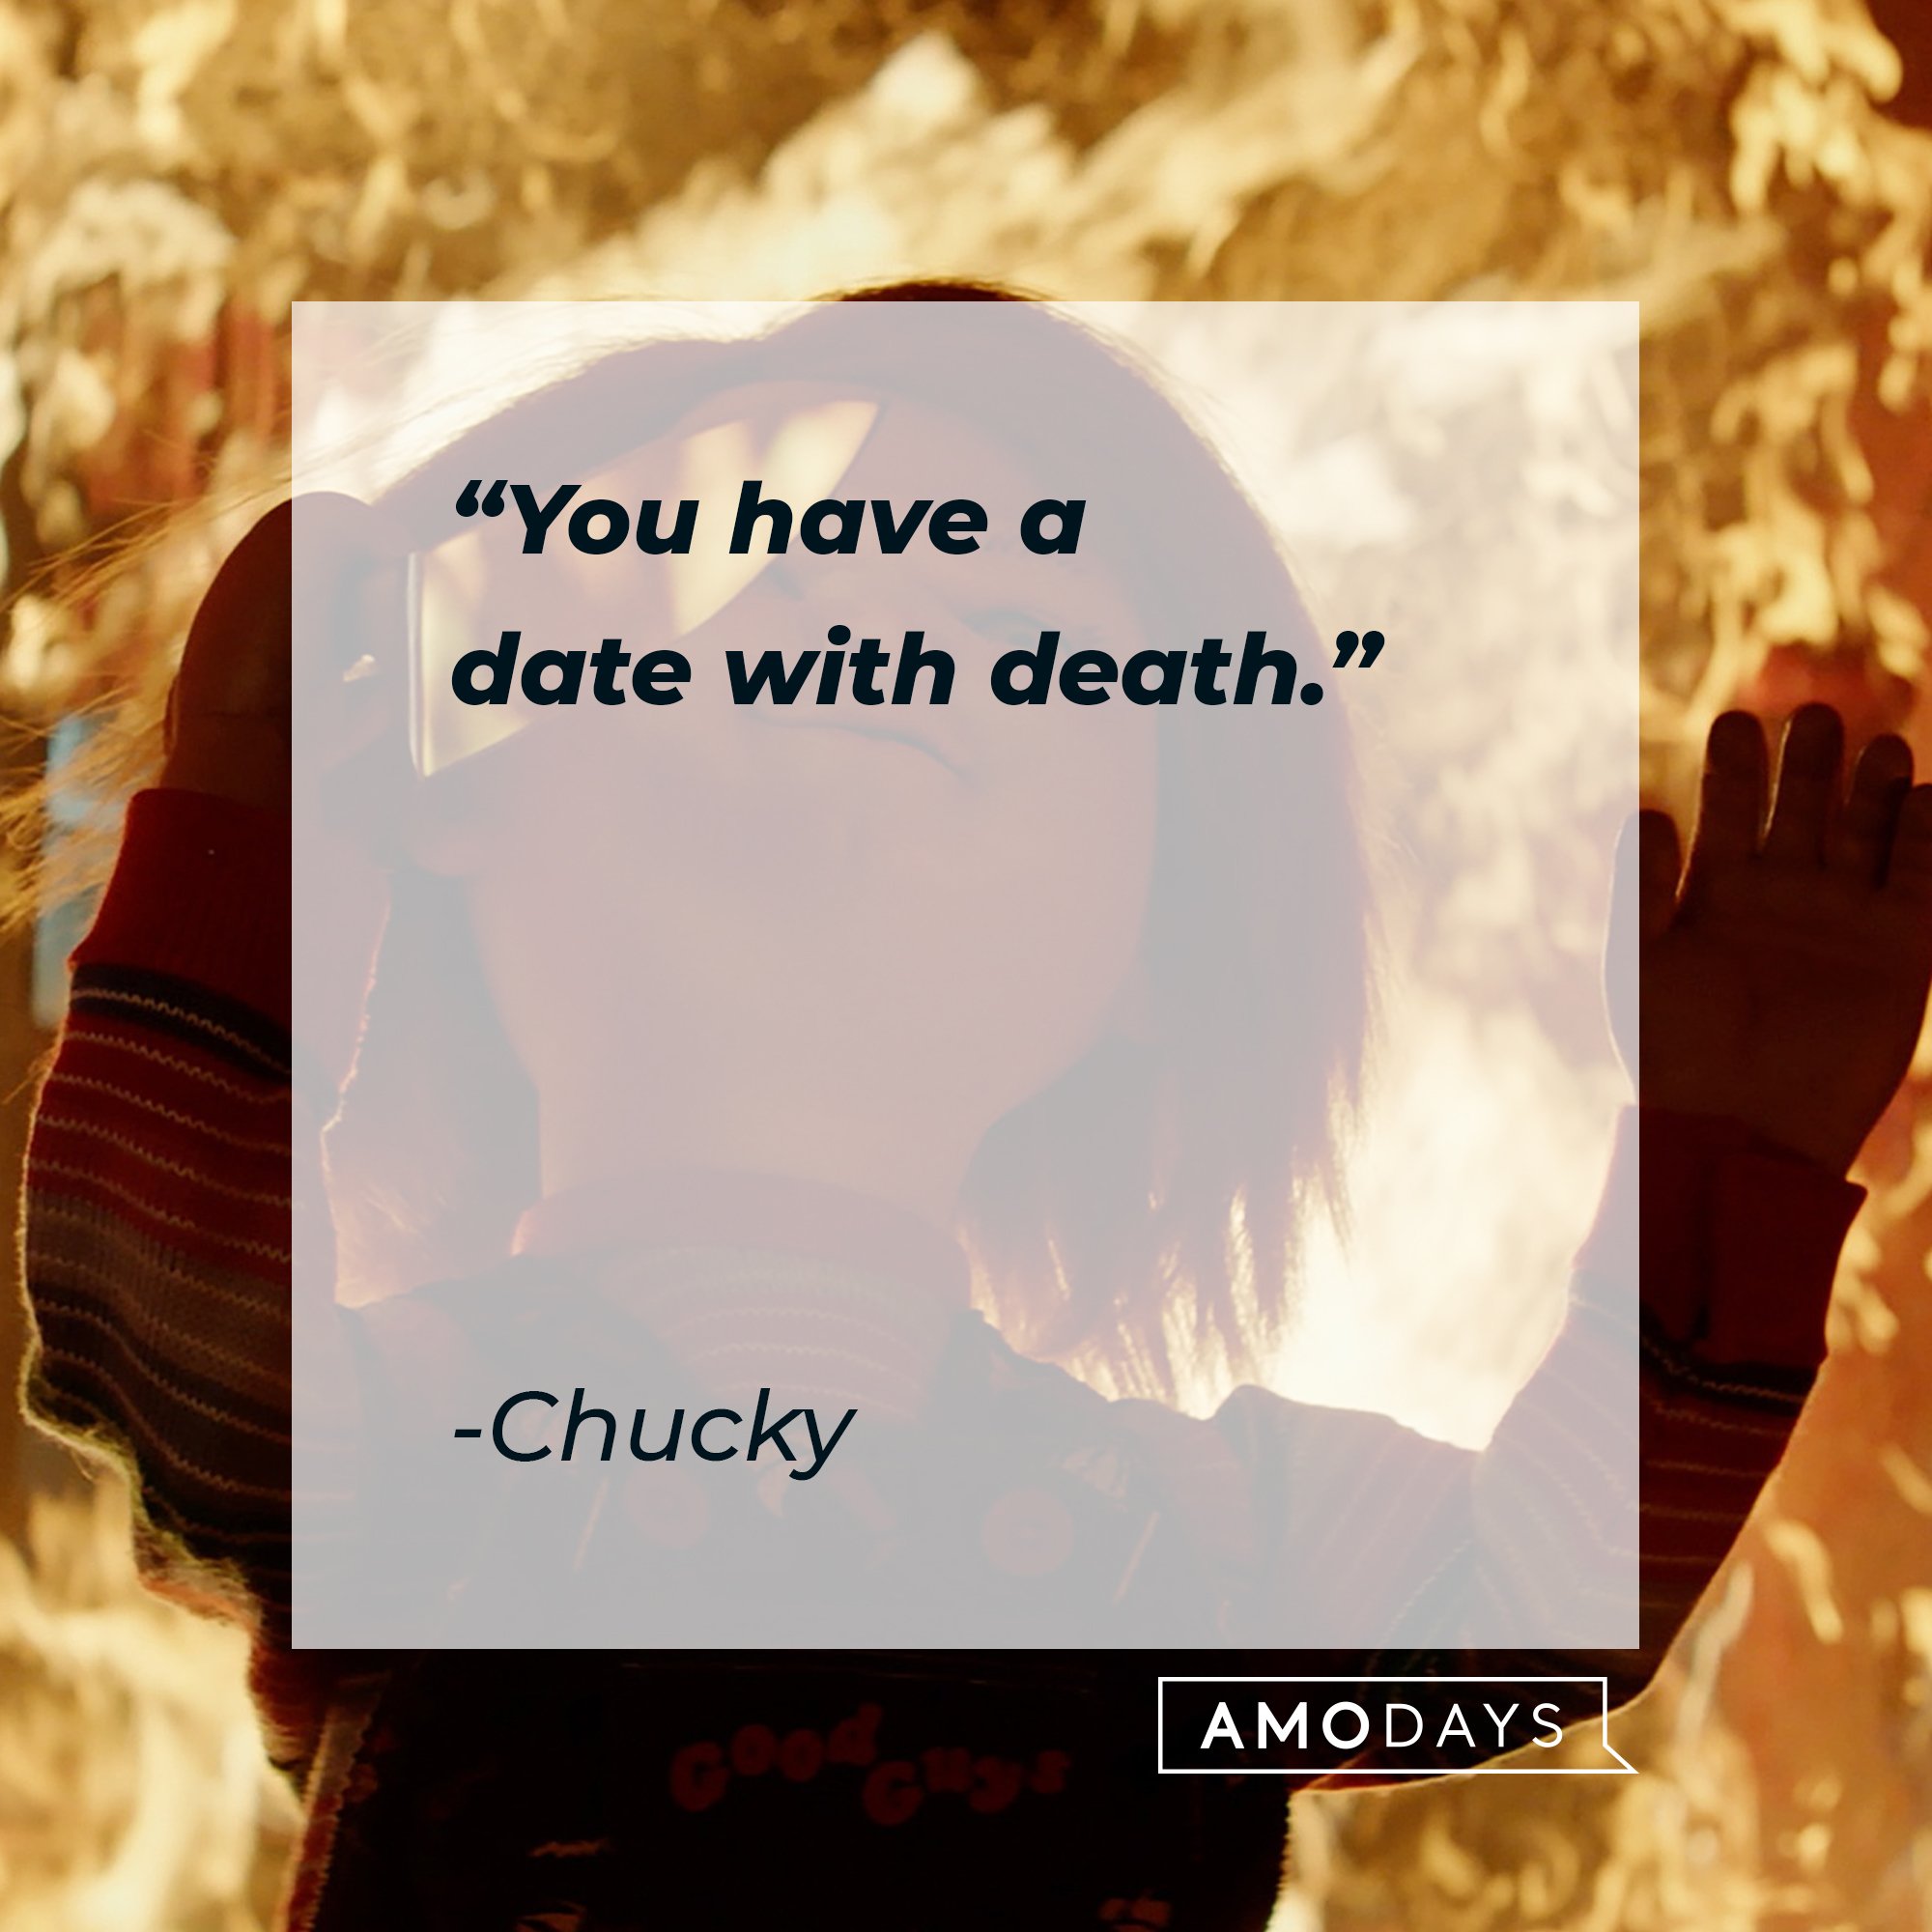 Chucky's quote: "You have a date with death." | Image: AmoDays